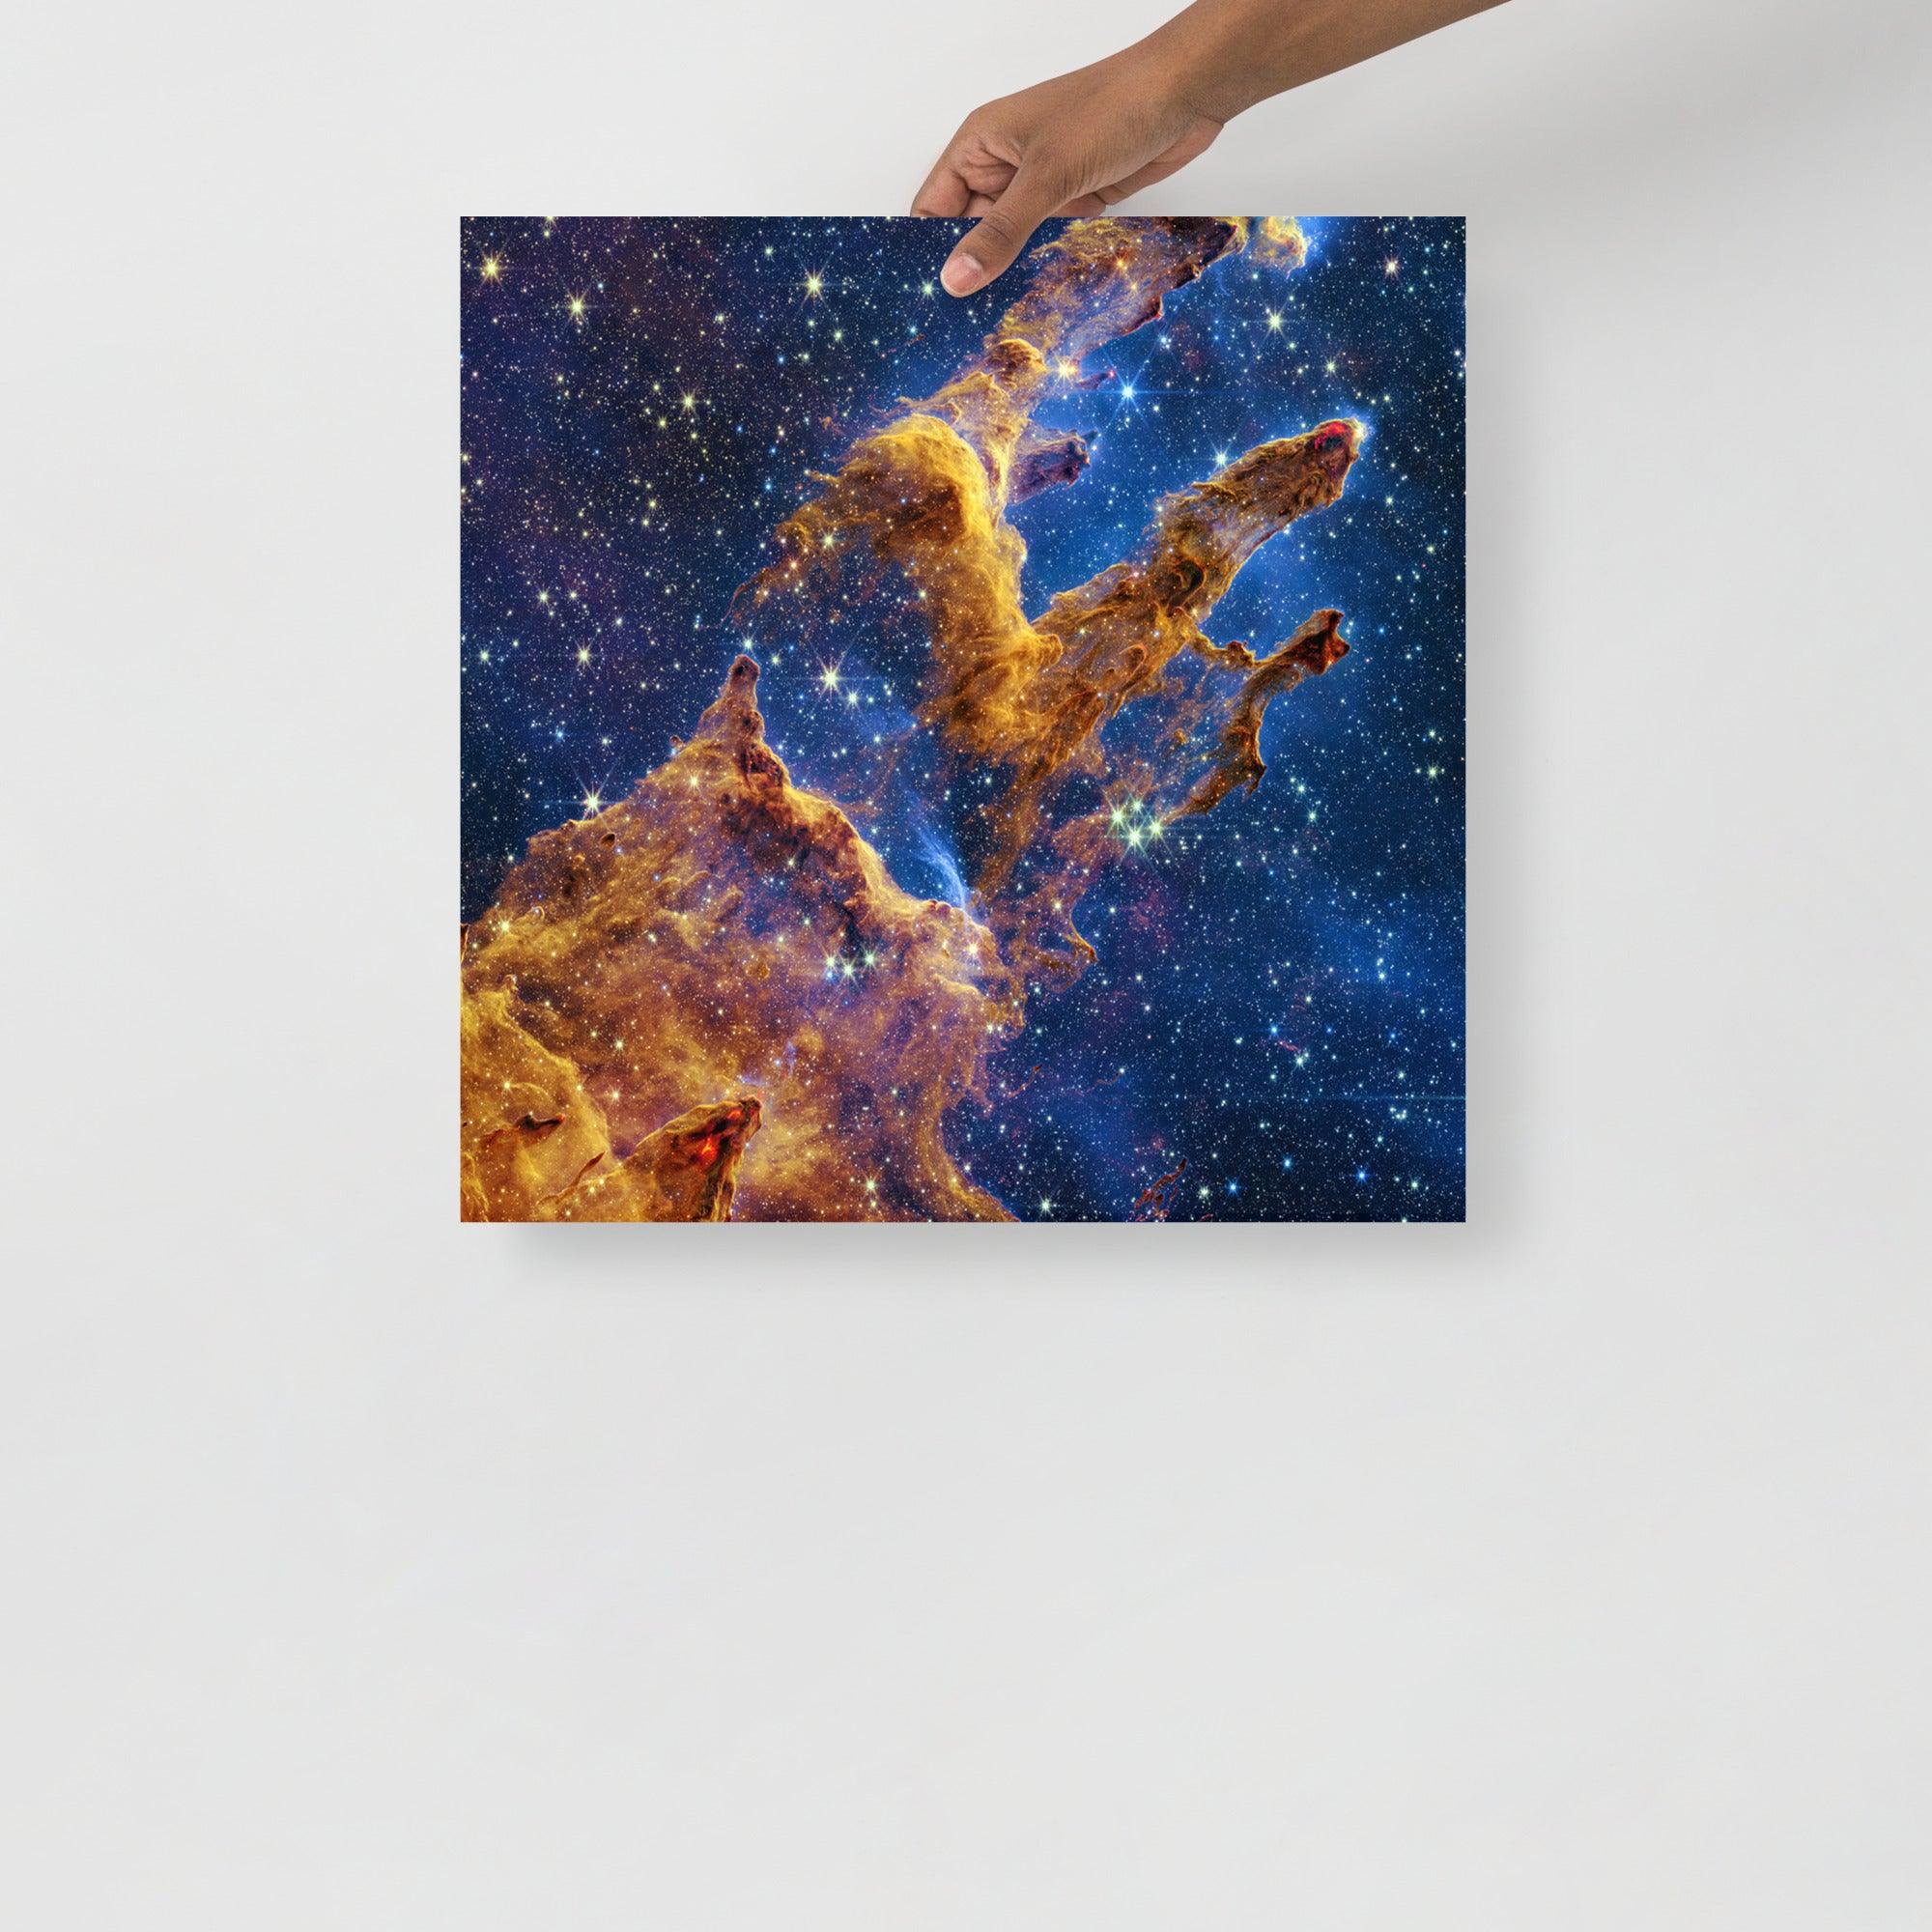 A Pillars of Creation by James Webb Telescope poster on a plain backdrop in size 18x18”.